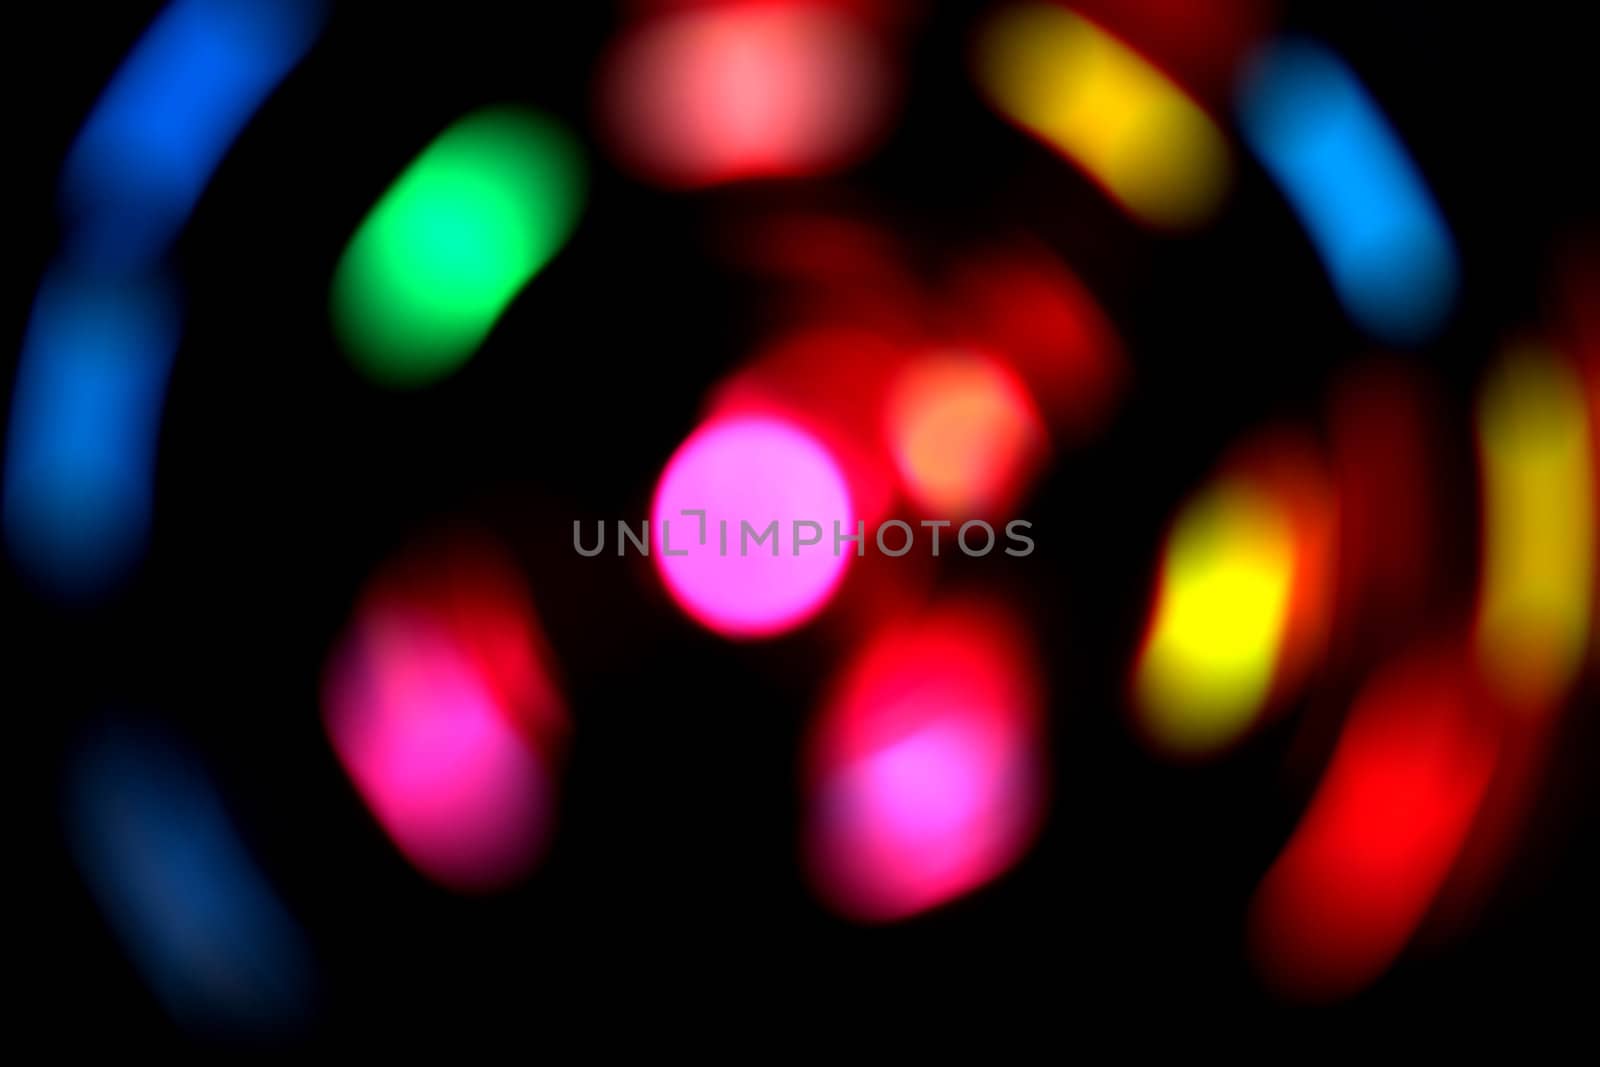 Colorful blurred lights on a dark background.  Used a spin effect.